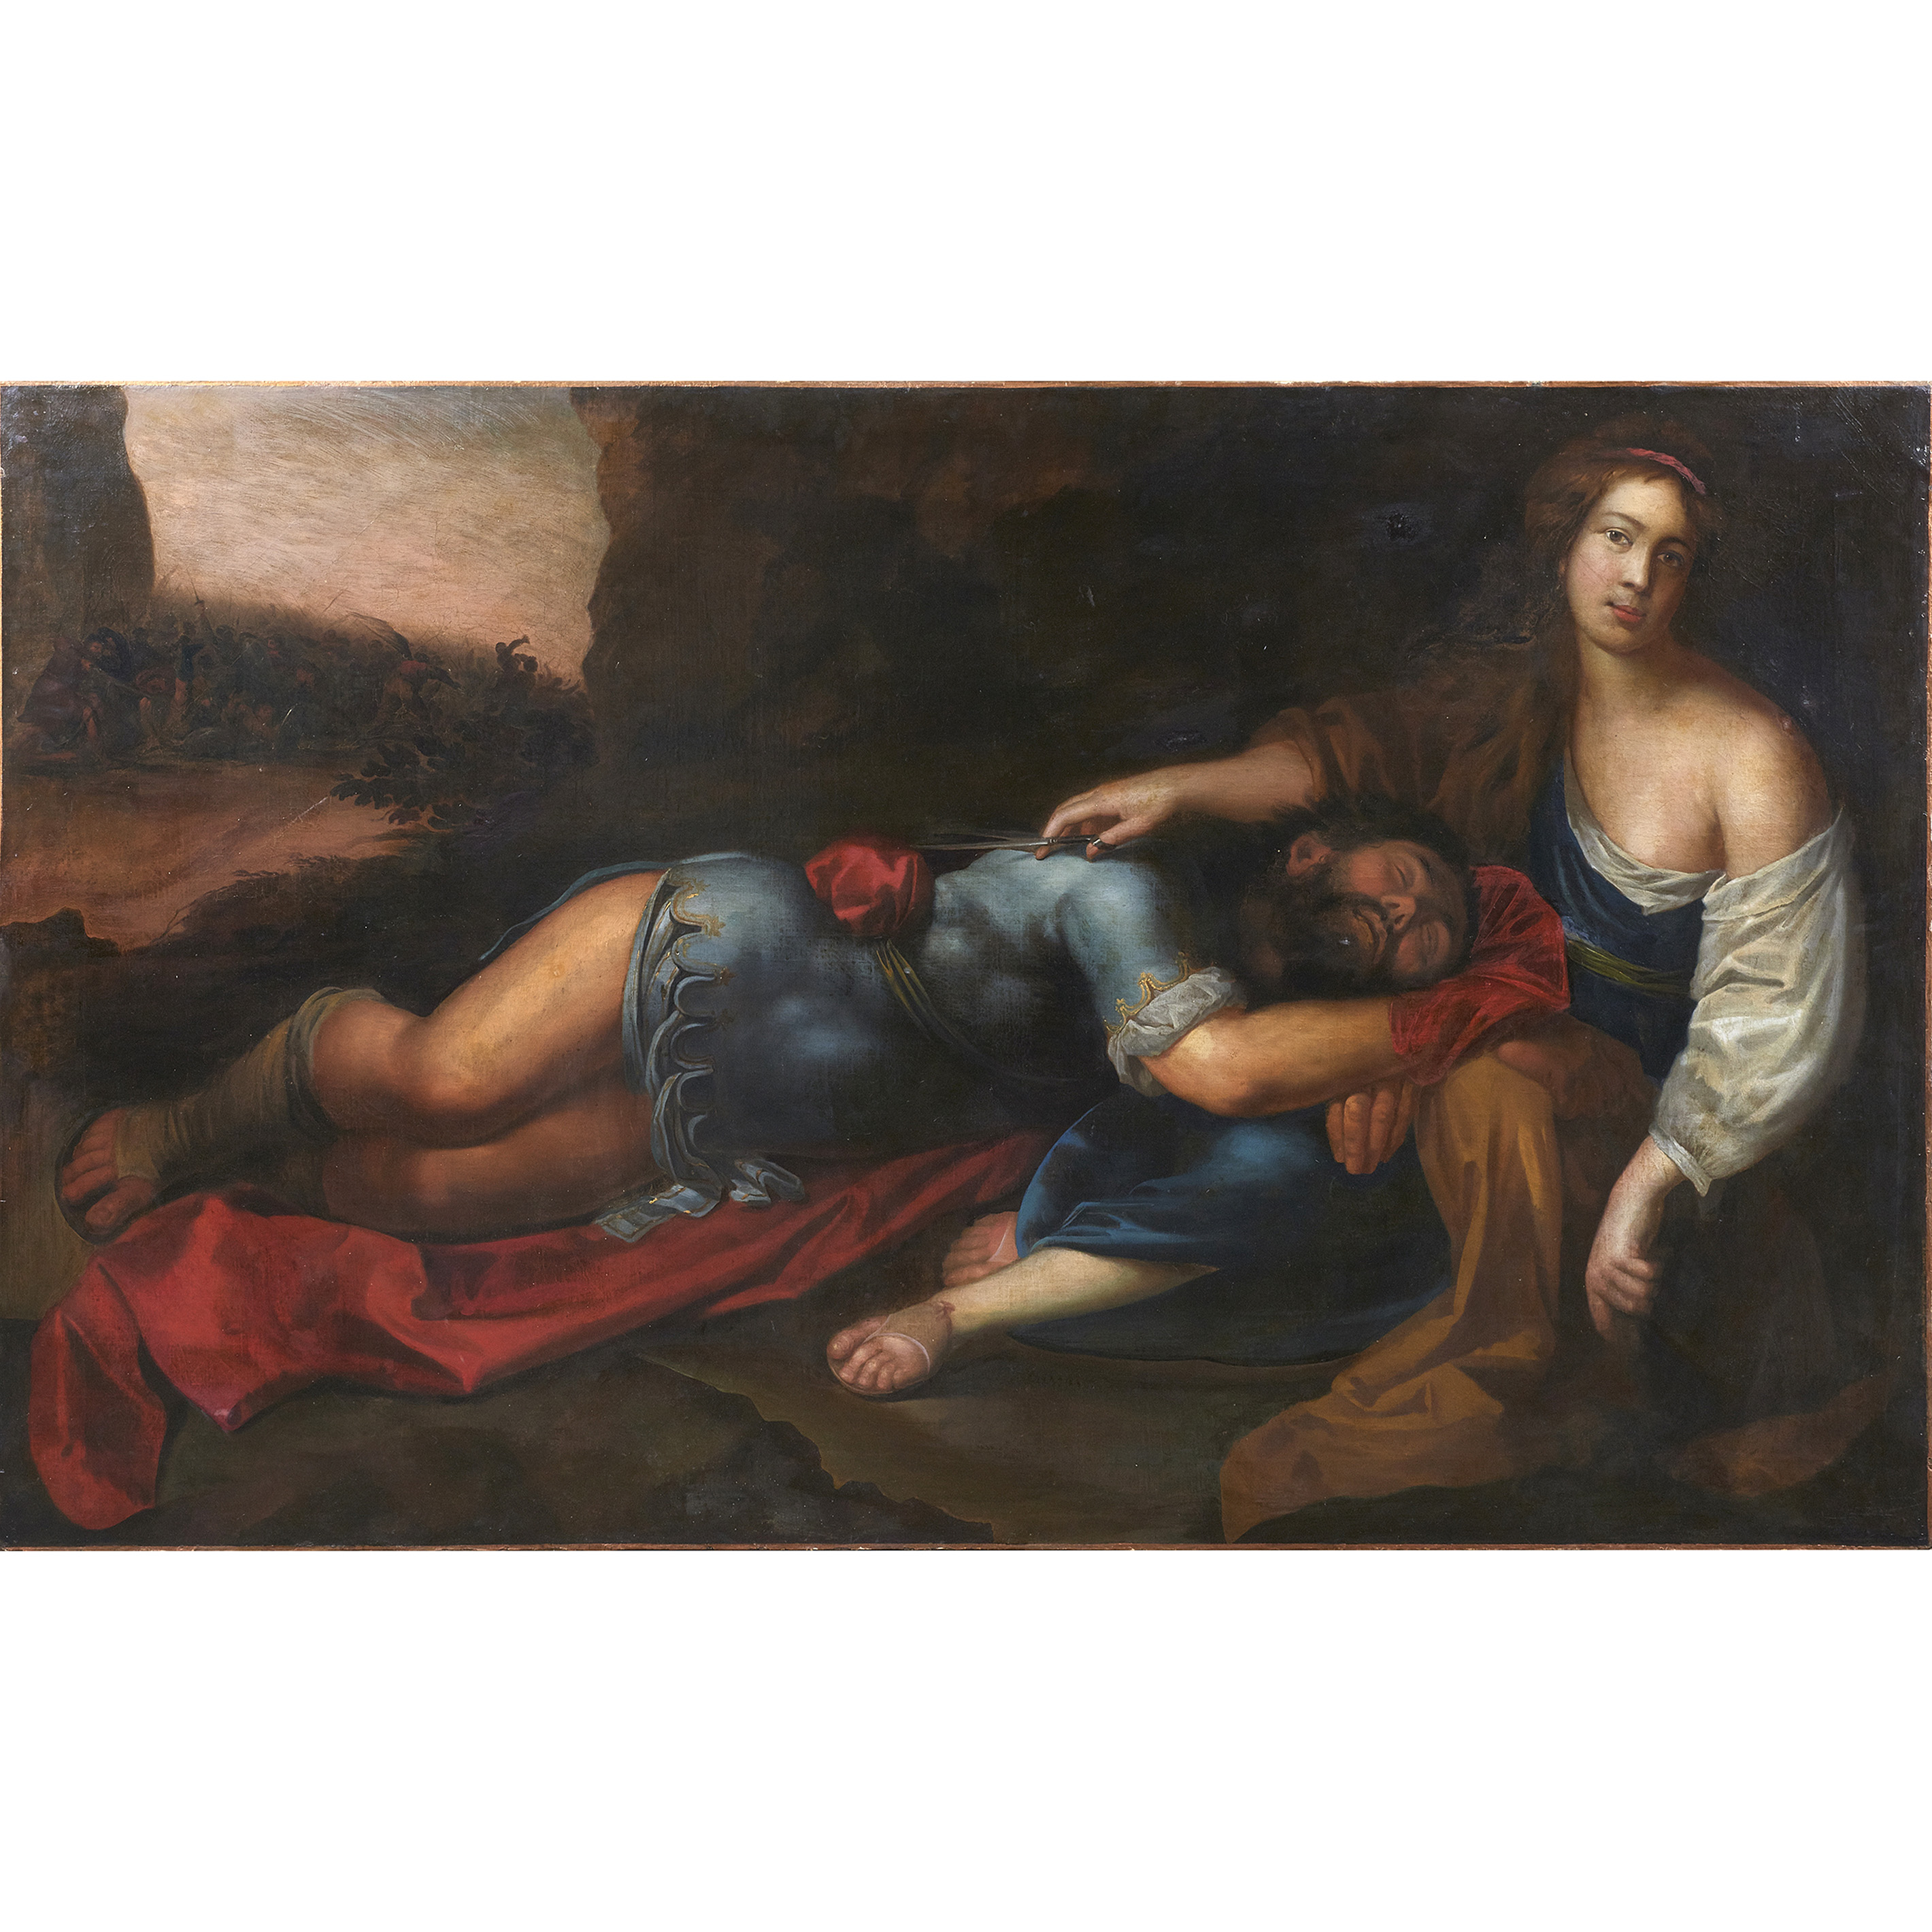 PAINTING SAMSON AND DELILAH European 3a4732